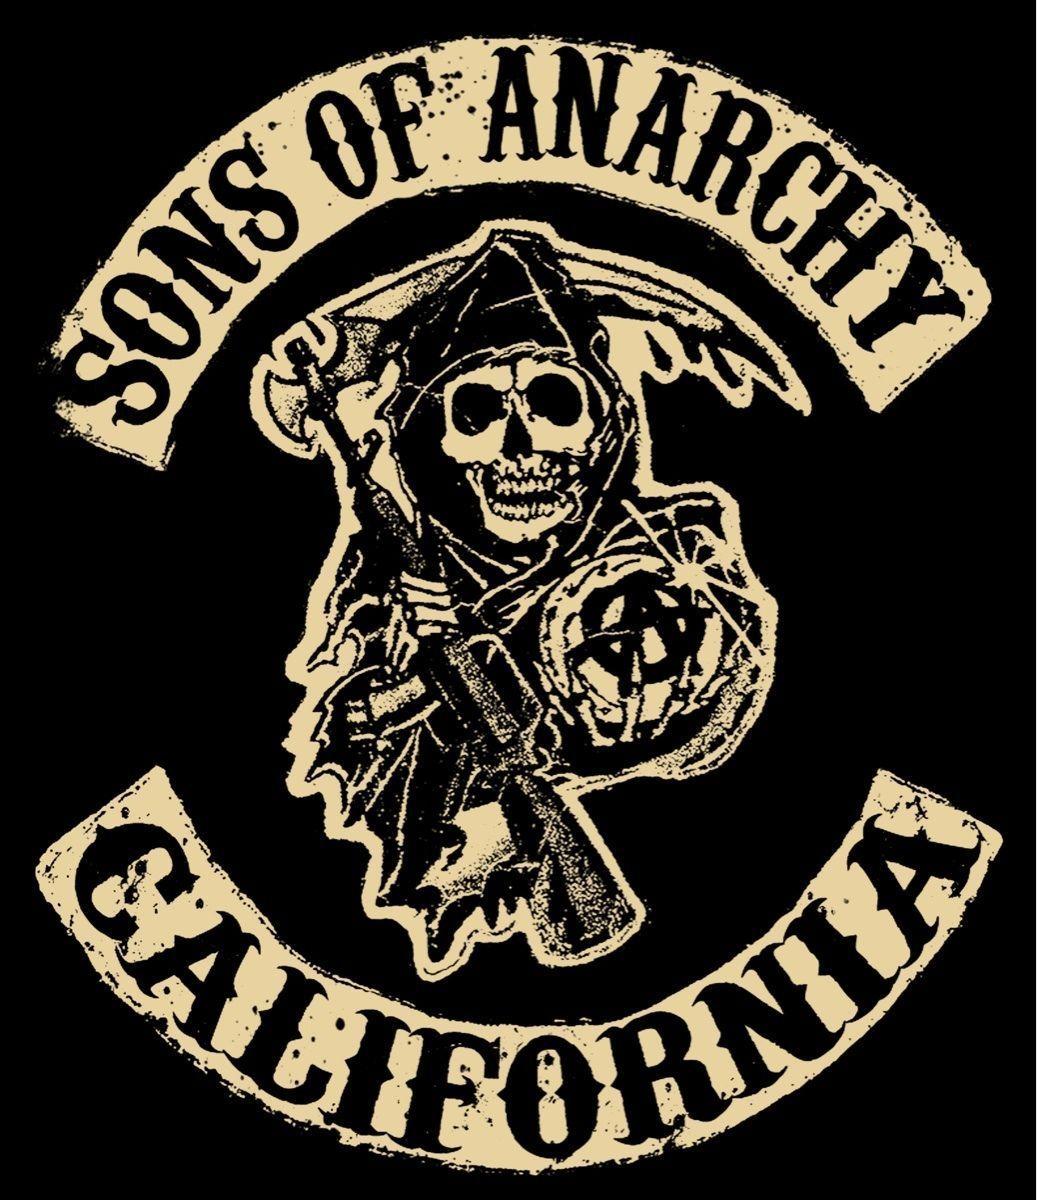 Sons of Anarchy Wallpaper! Post your best!